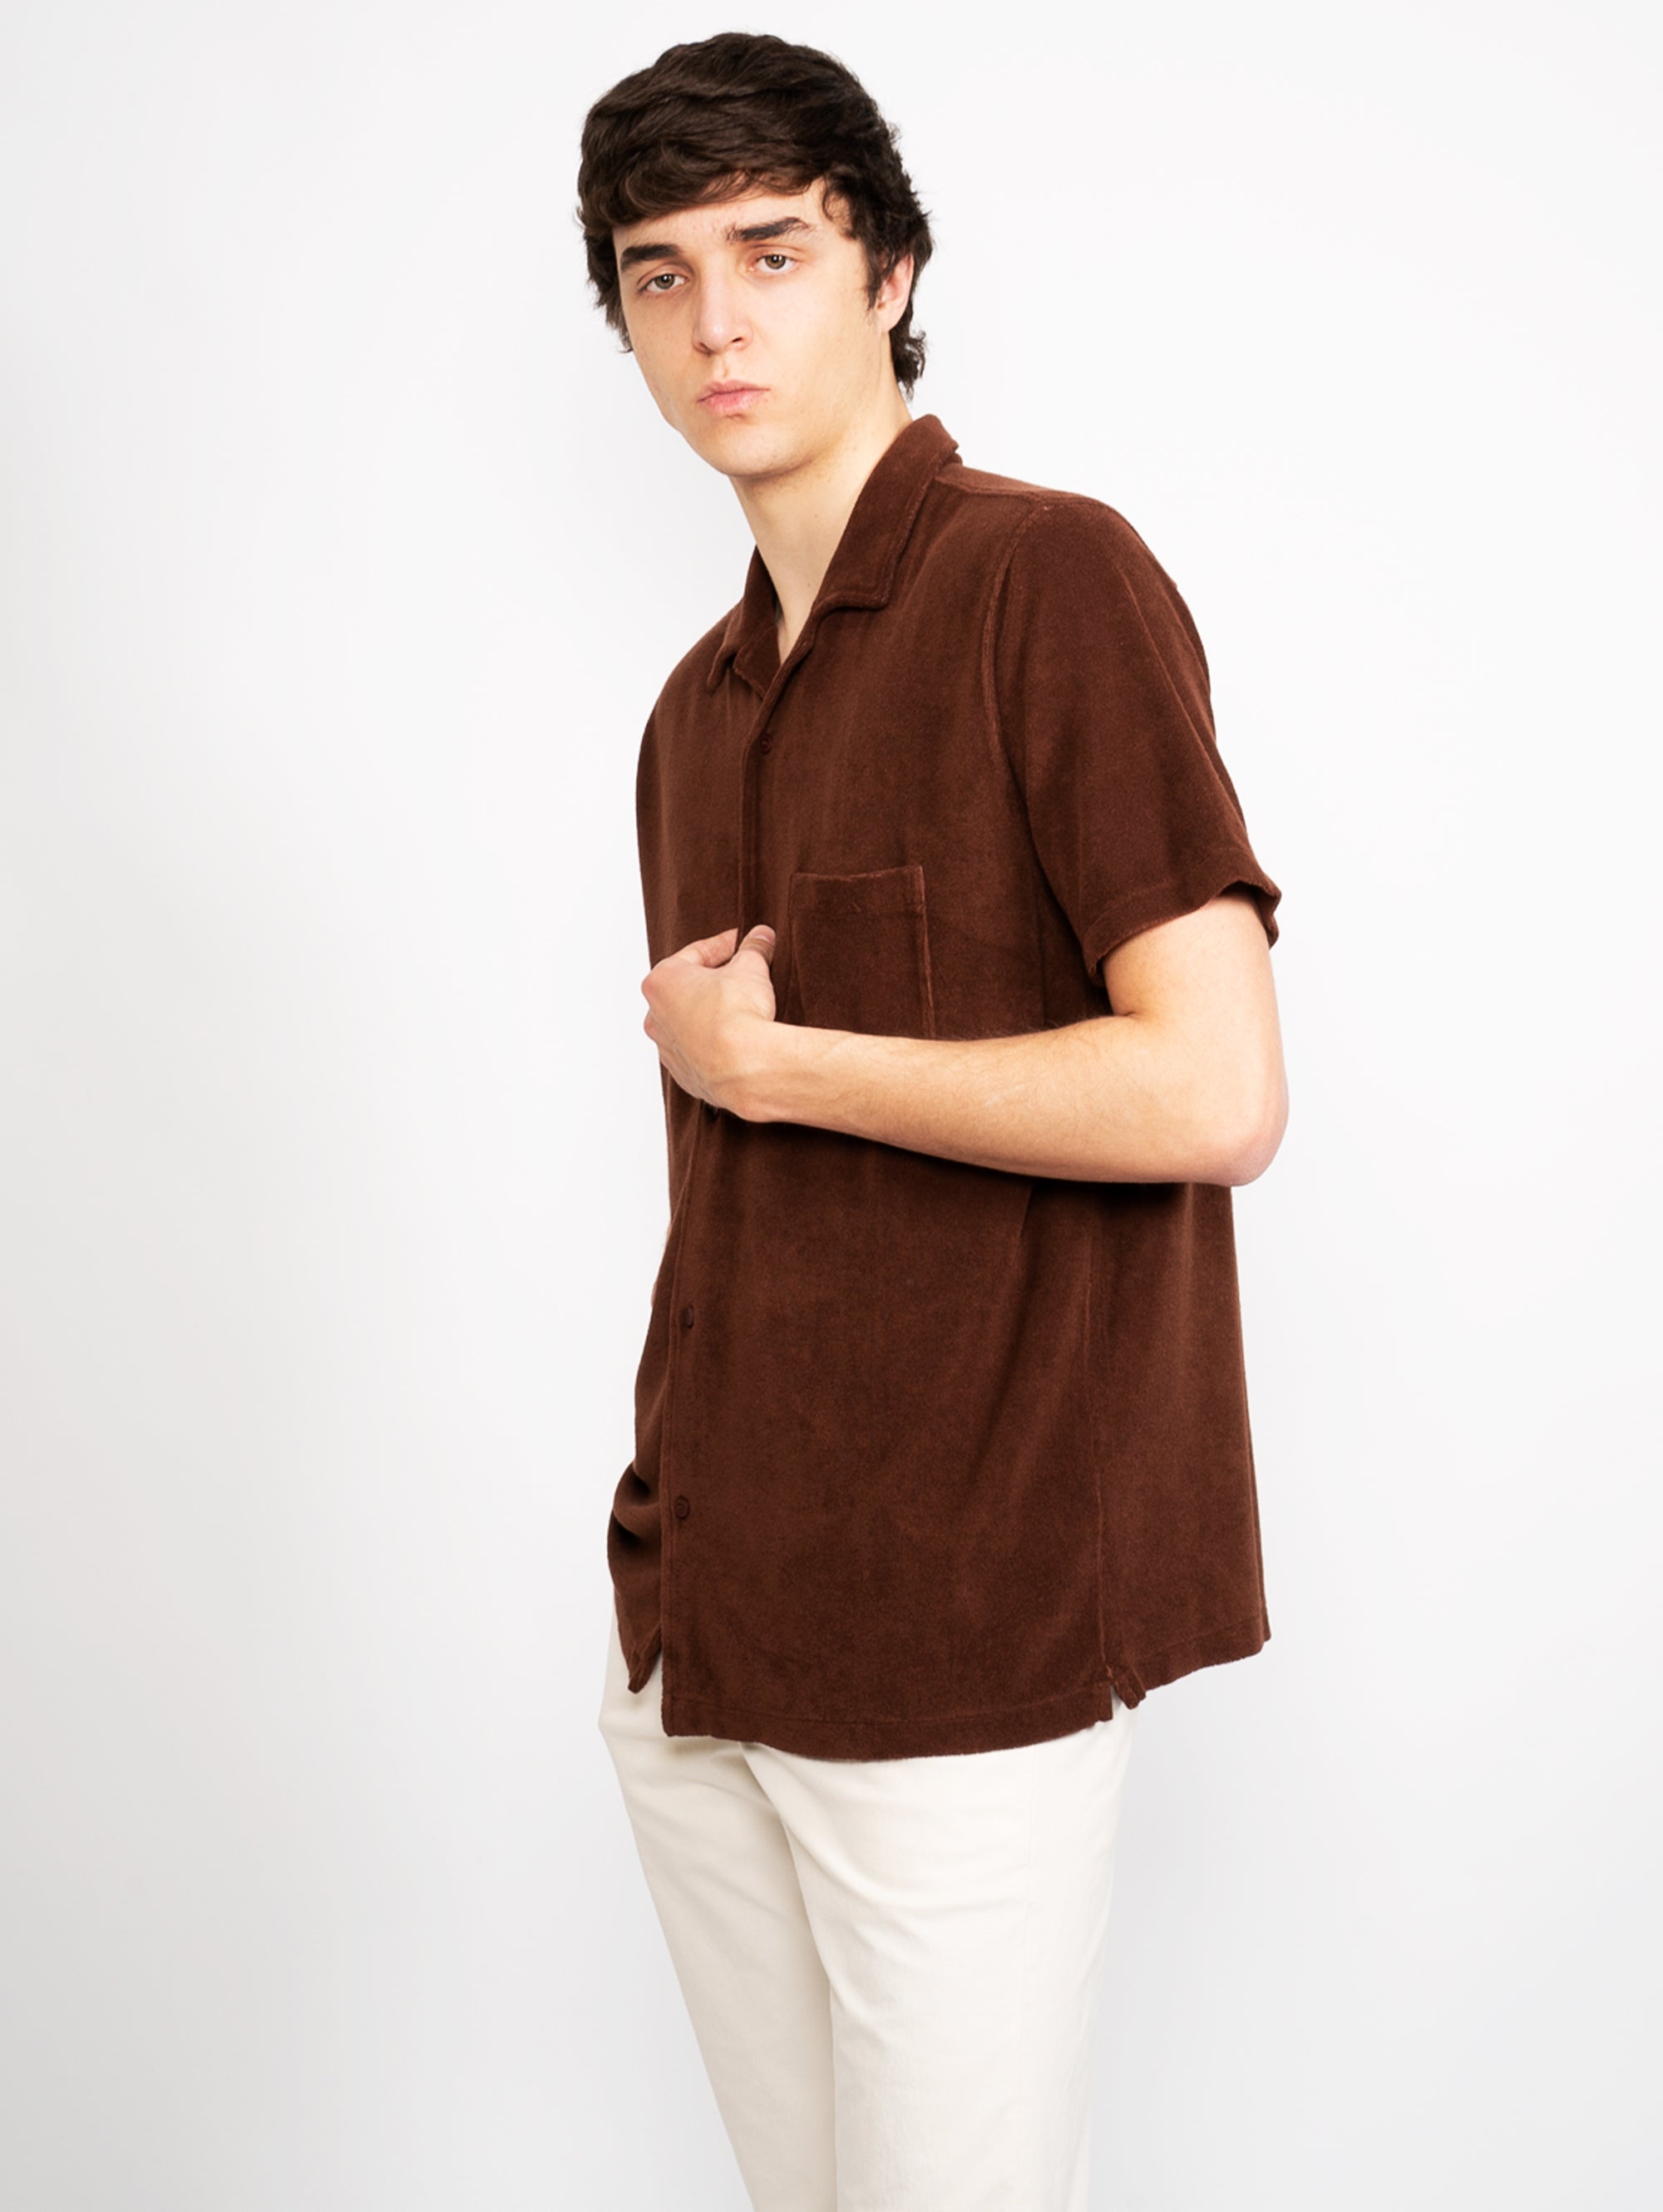 Short Sleeves Shirt in Brown Terry Cloth